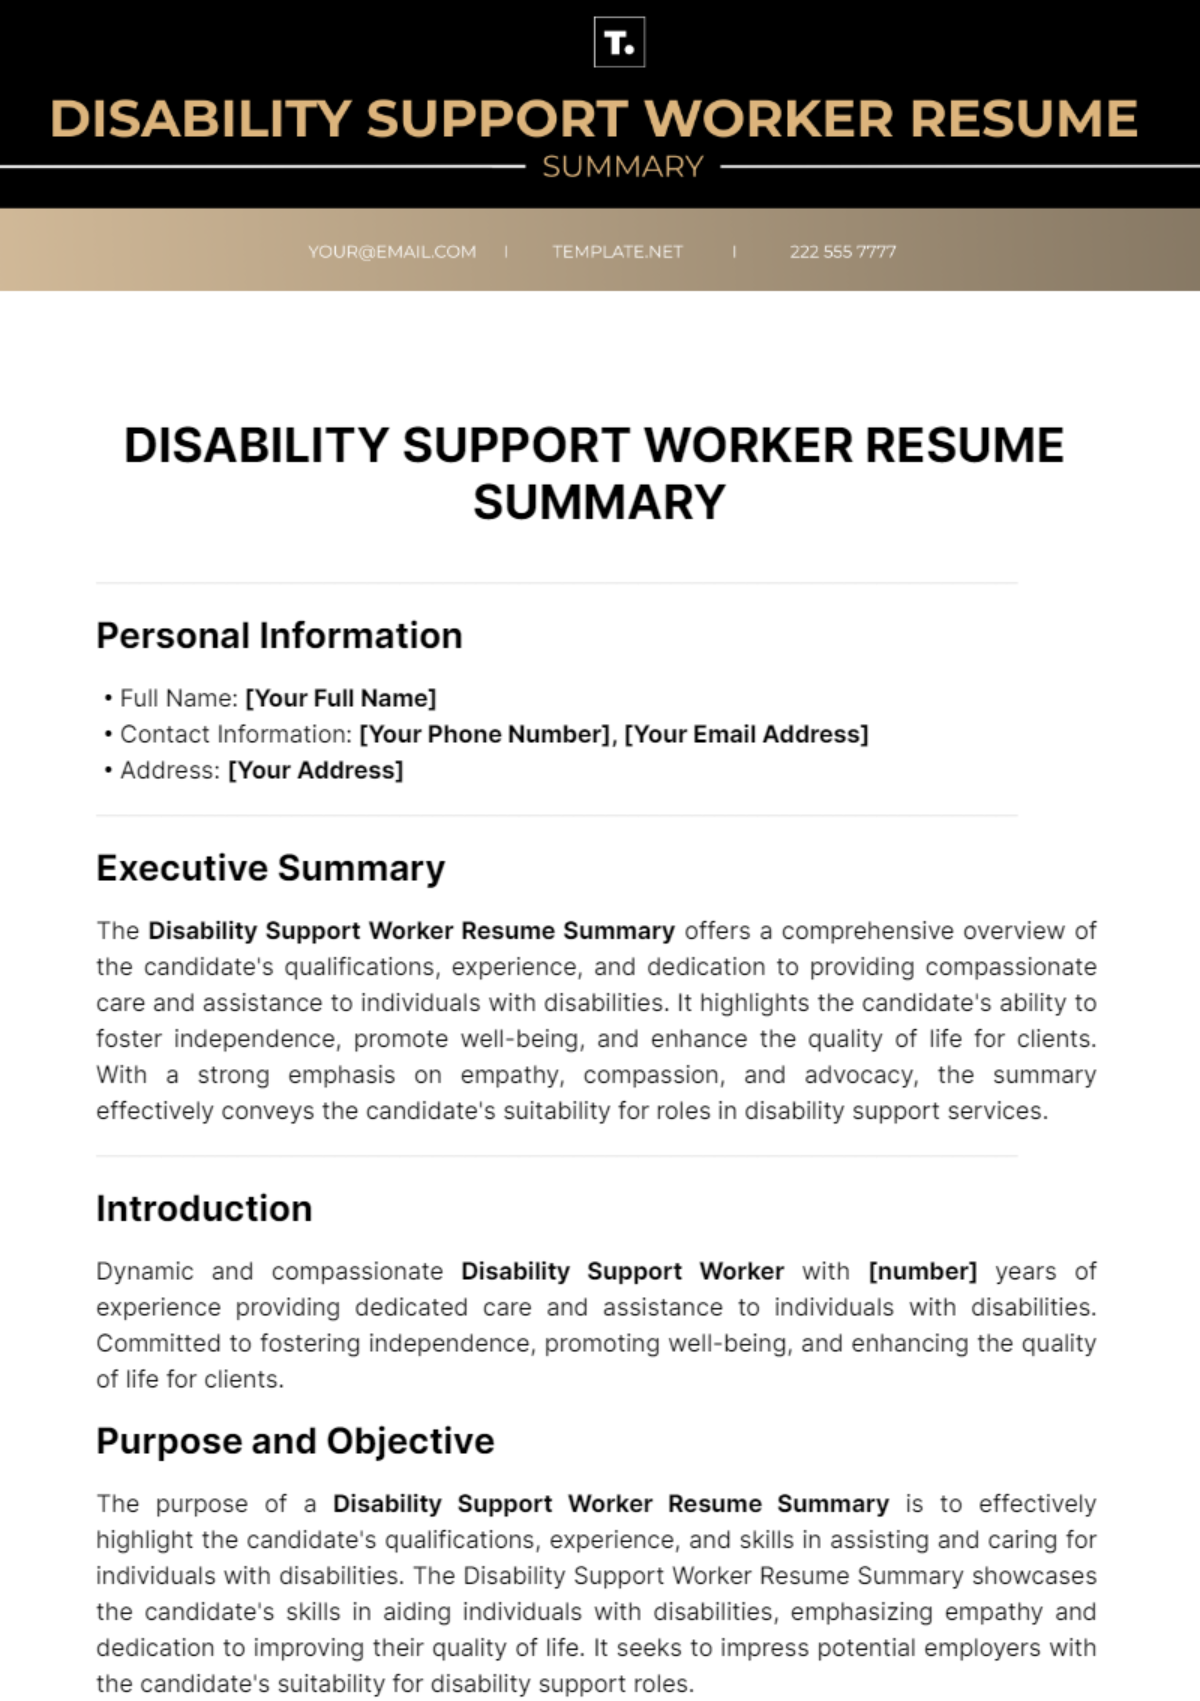 Disability Support Worker Resume Summary Template